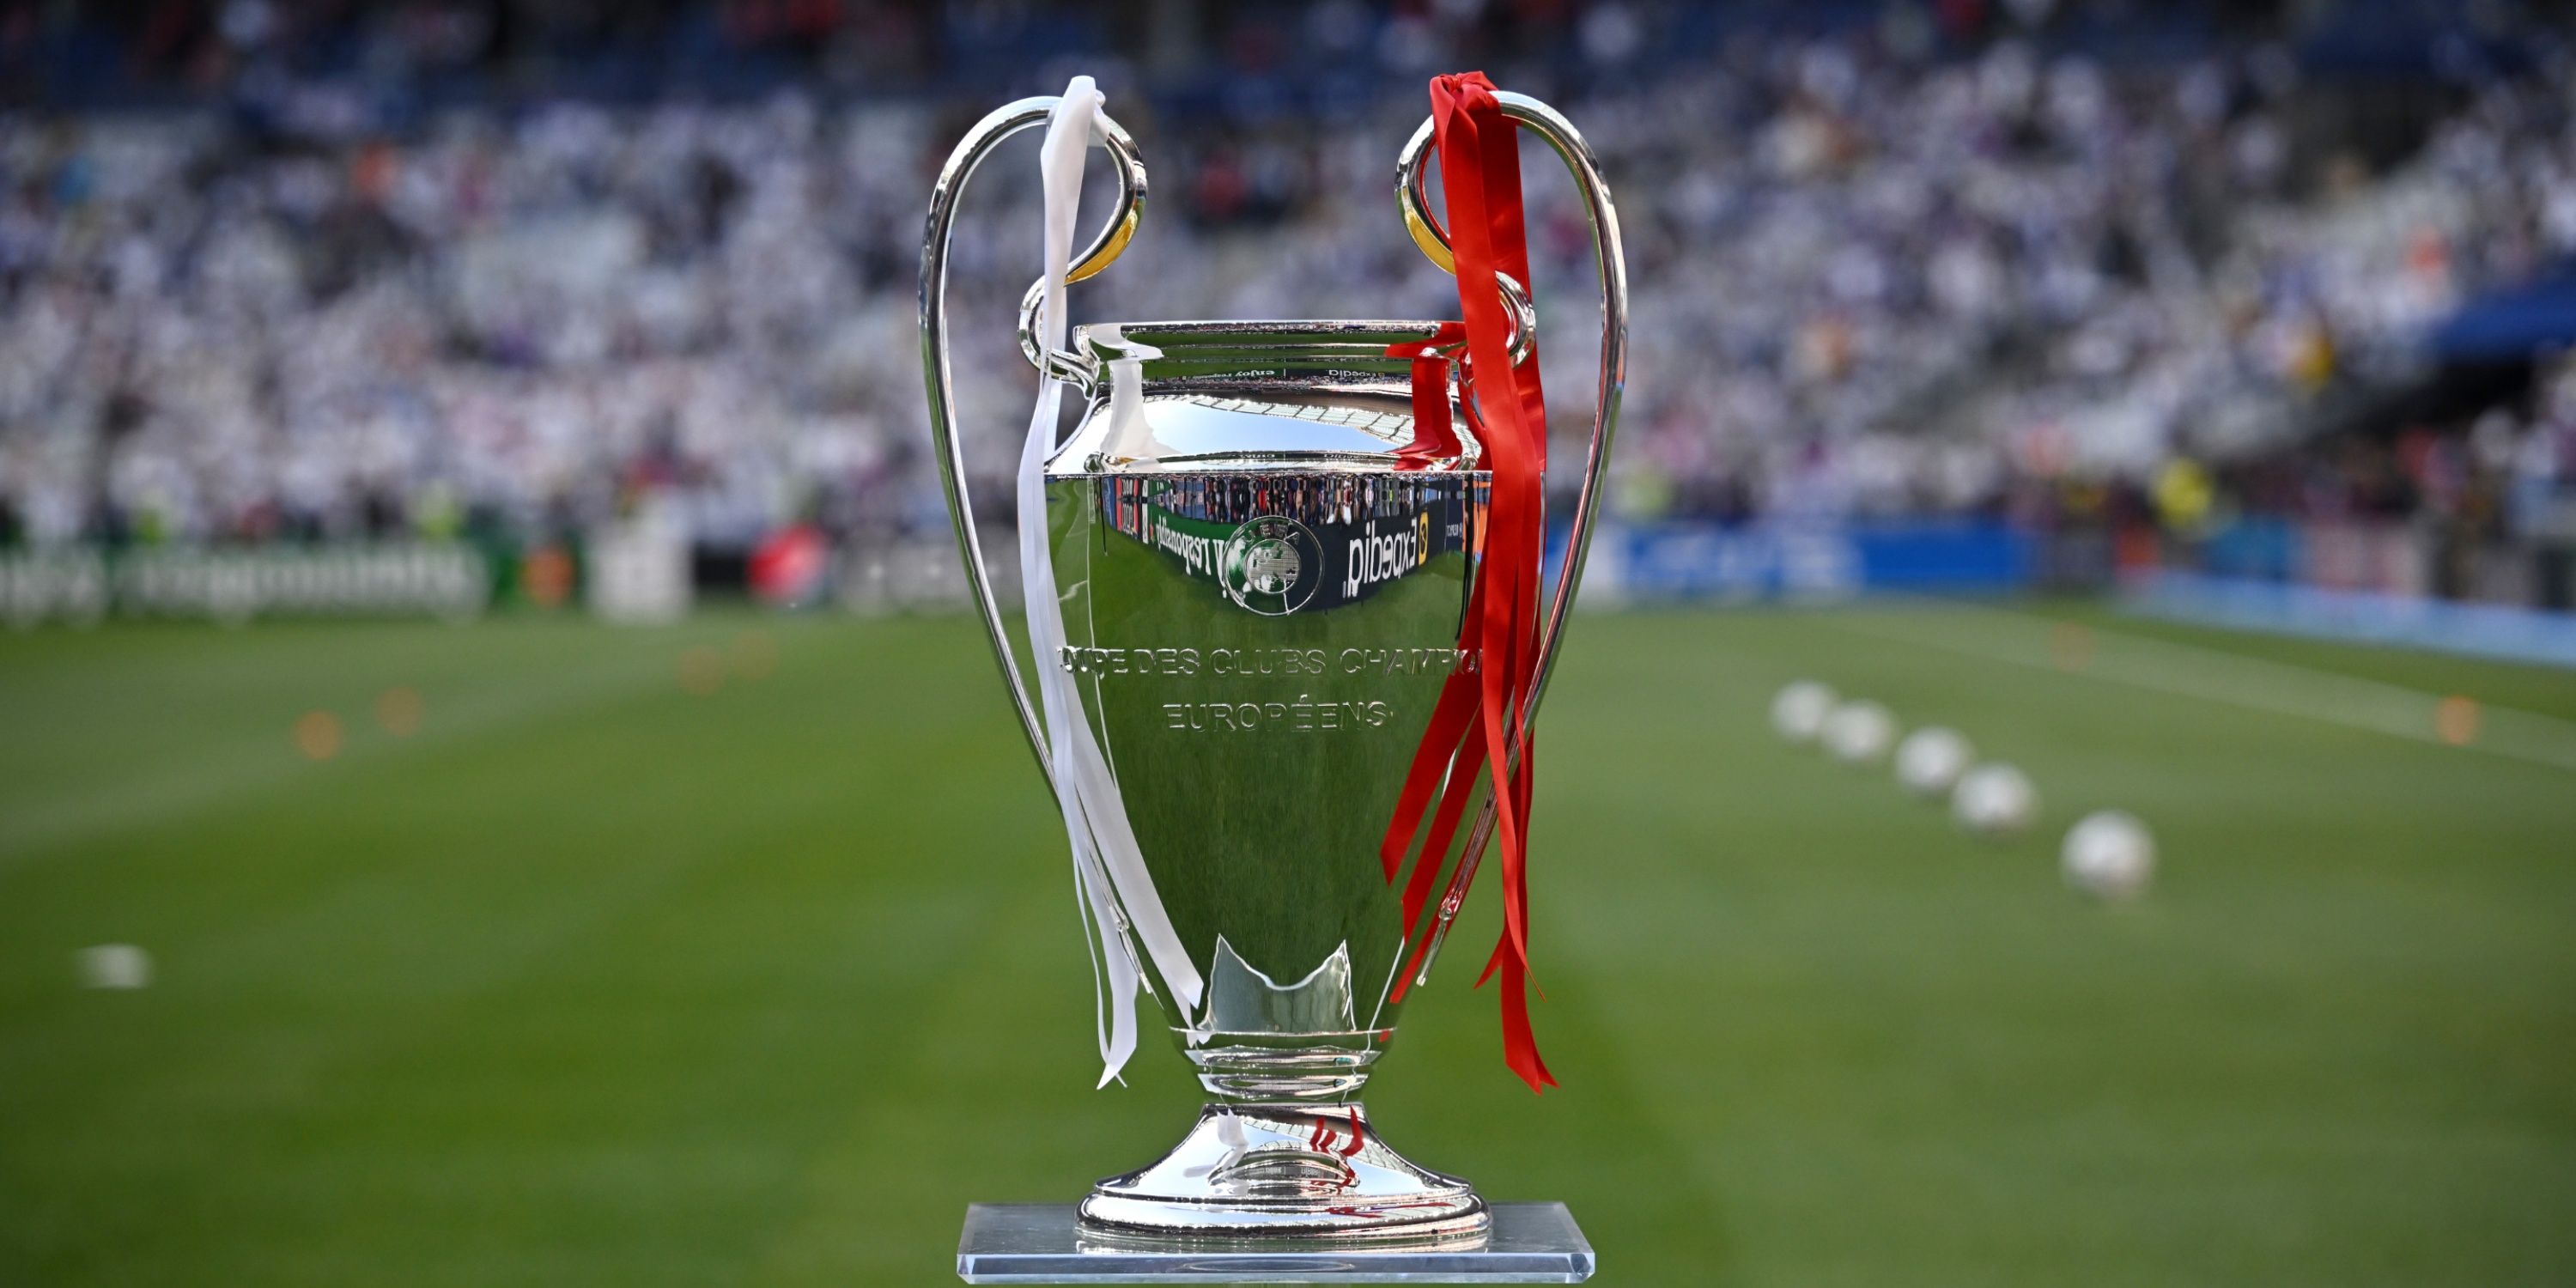 The Champions League trophy on display.